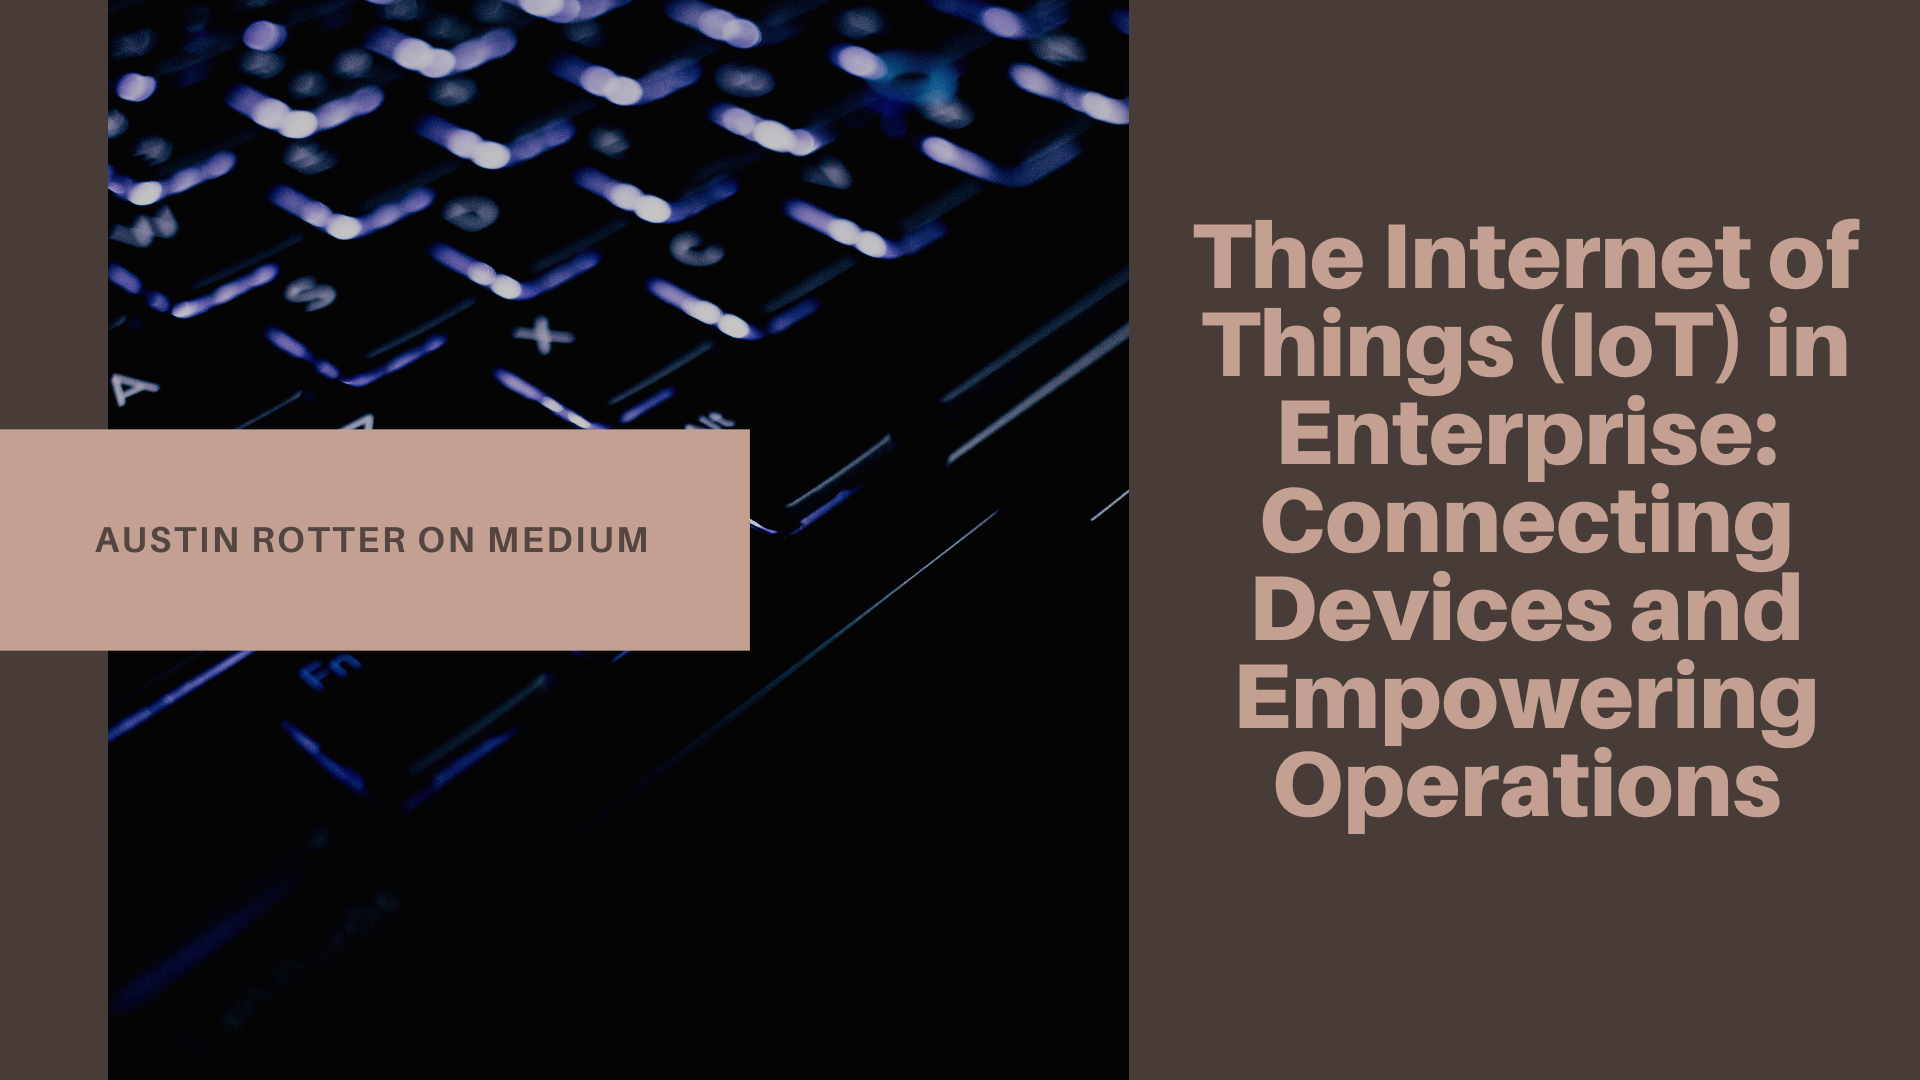 ® ? a fa o
Od a RY -
PR &lt; &gt; LU RETO EL
= SNF Things (IoT) in
/ Enterprise:
AUSTIN ROTTER ON MEDIUM ) pe dq Connecting
| Devices and
Empowering

Operations